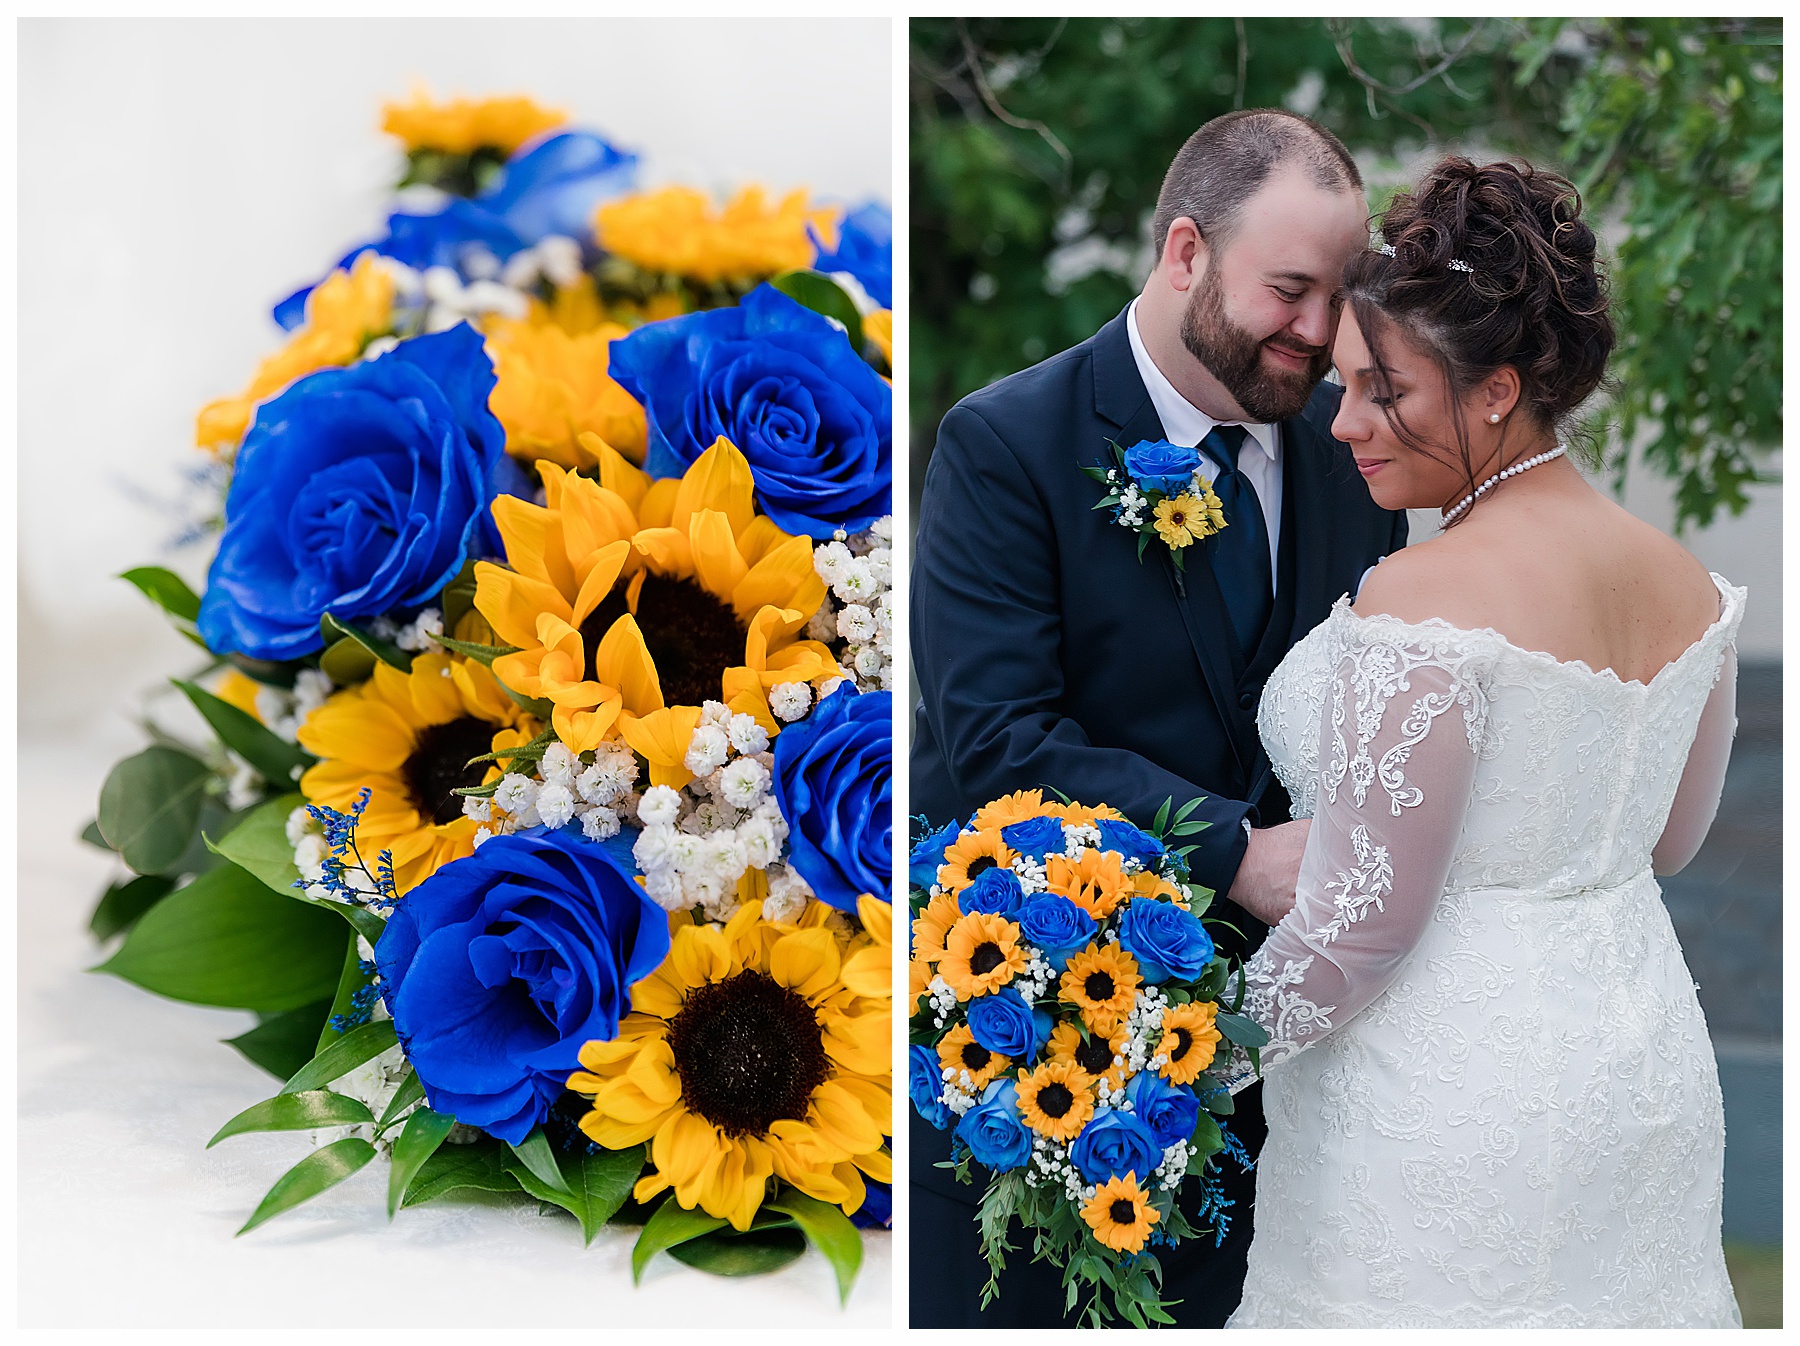 Groom looks at bride as she looks at royal blue and sunflower bouquet.  Bismarck Heritage Center